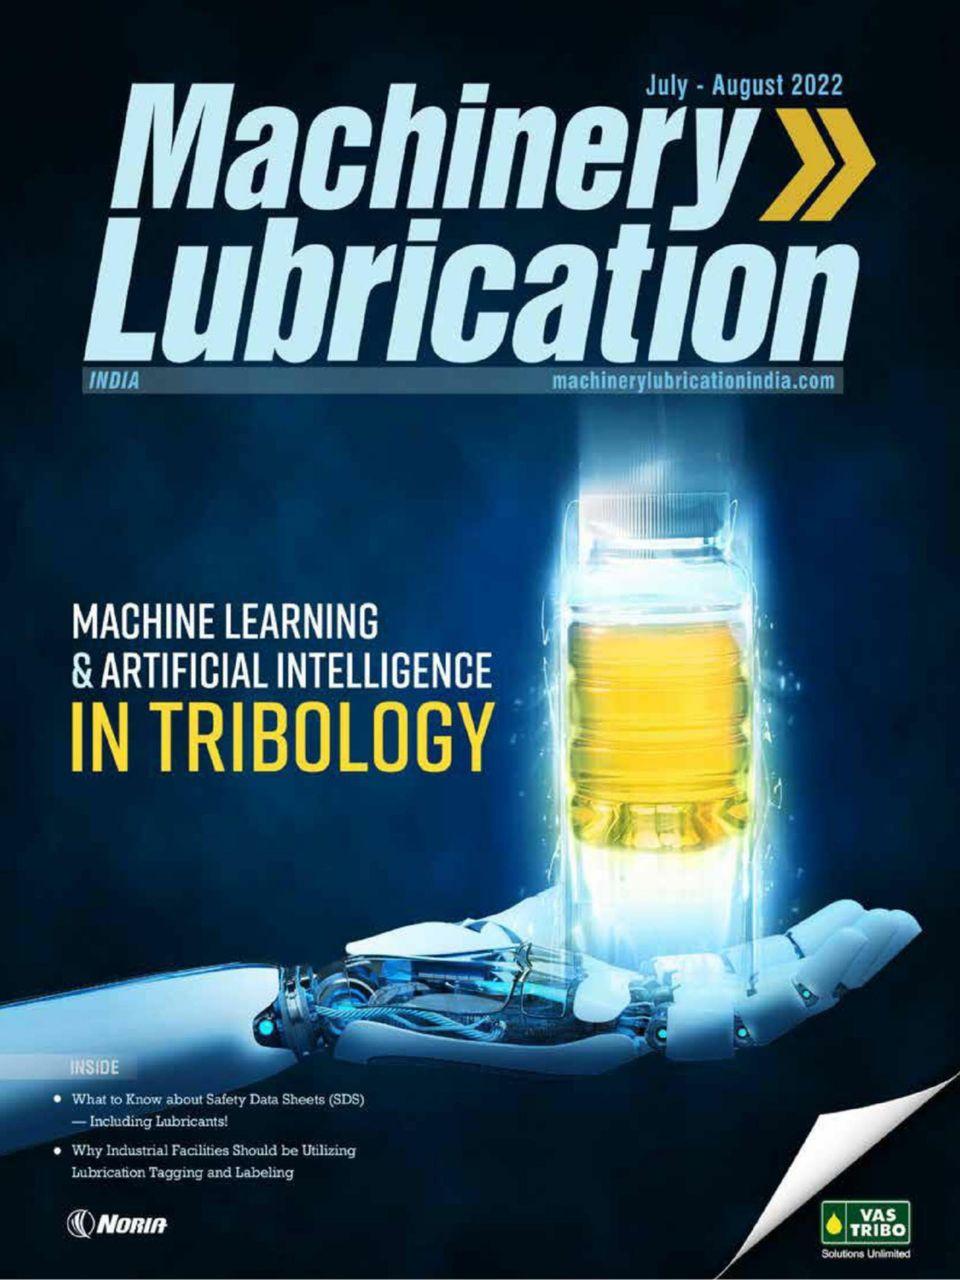 Why Industrial Facilities Should be Utilizing Lubrication Tagging and  Labeling